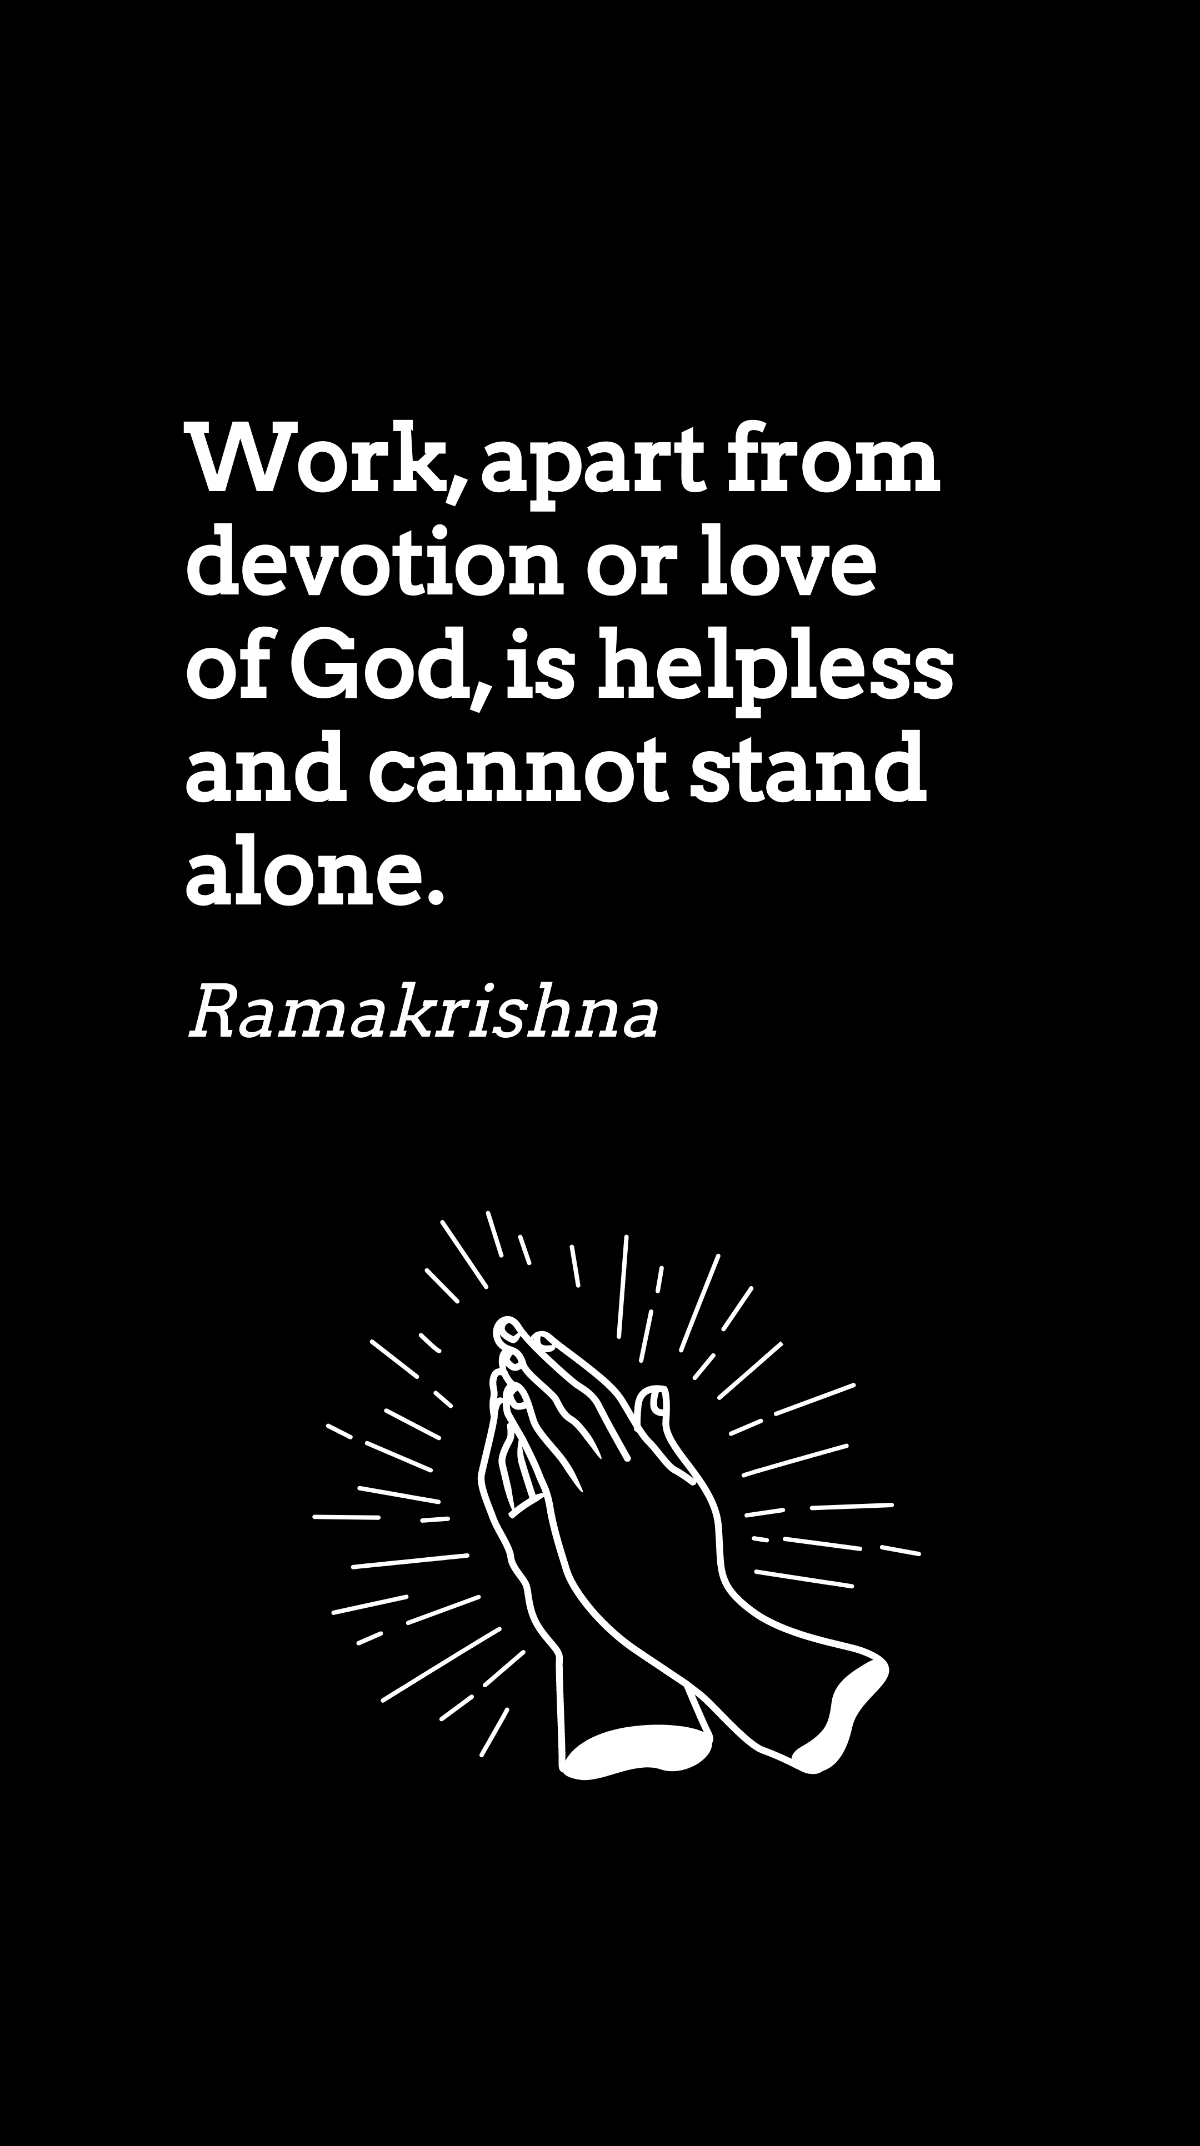 Ramakrishna - Work, apart from devotion or love of God, is helpless and cannot stand alone. Template